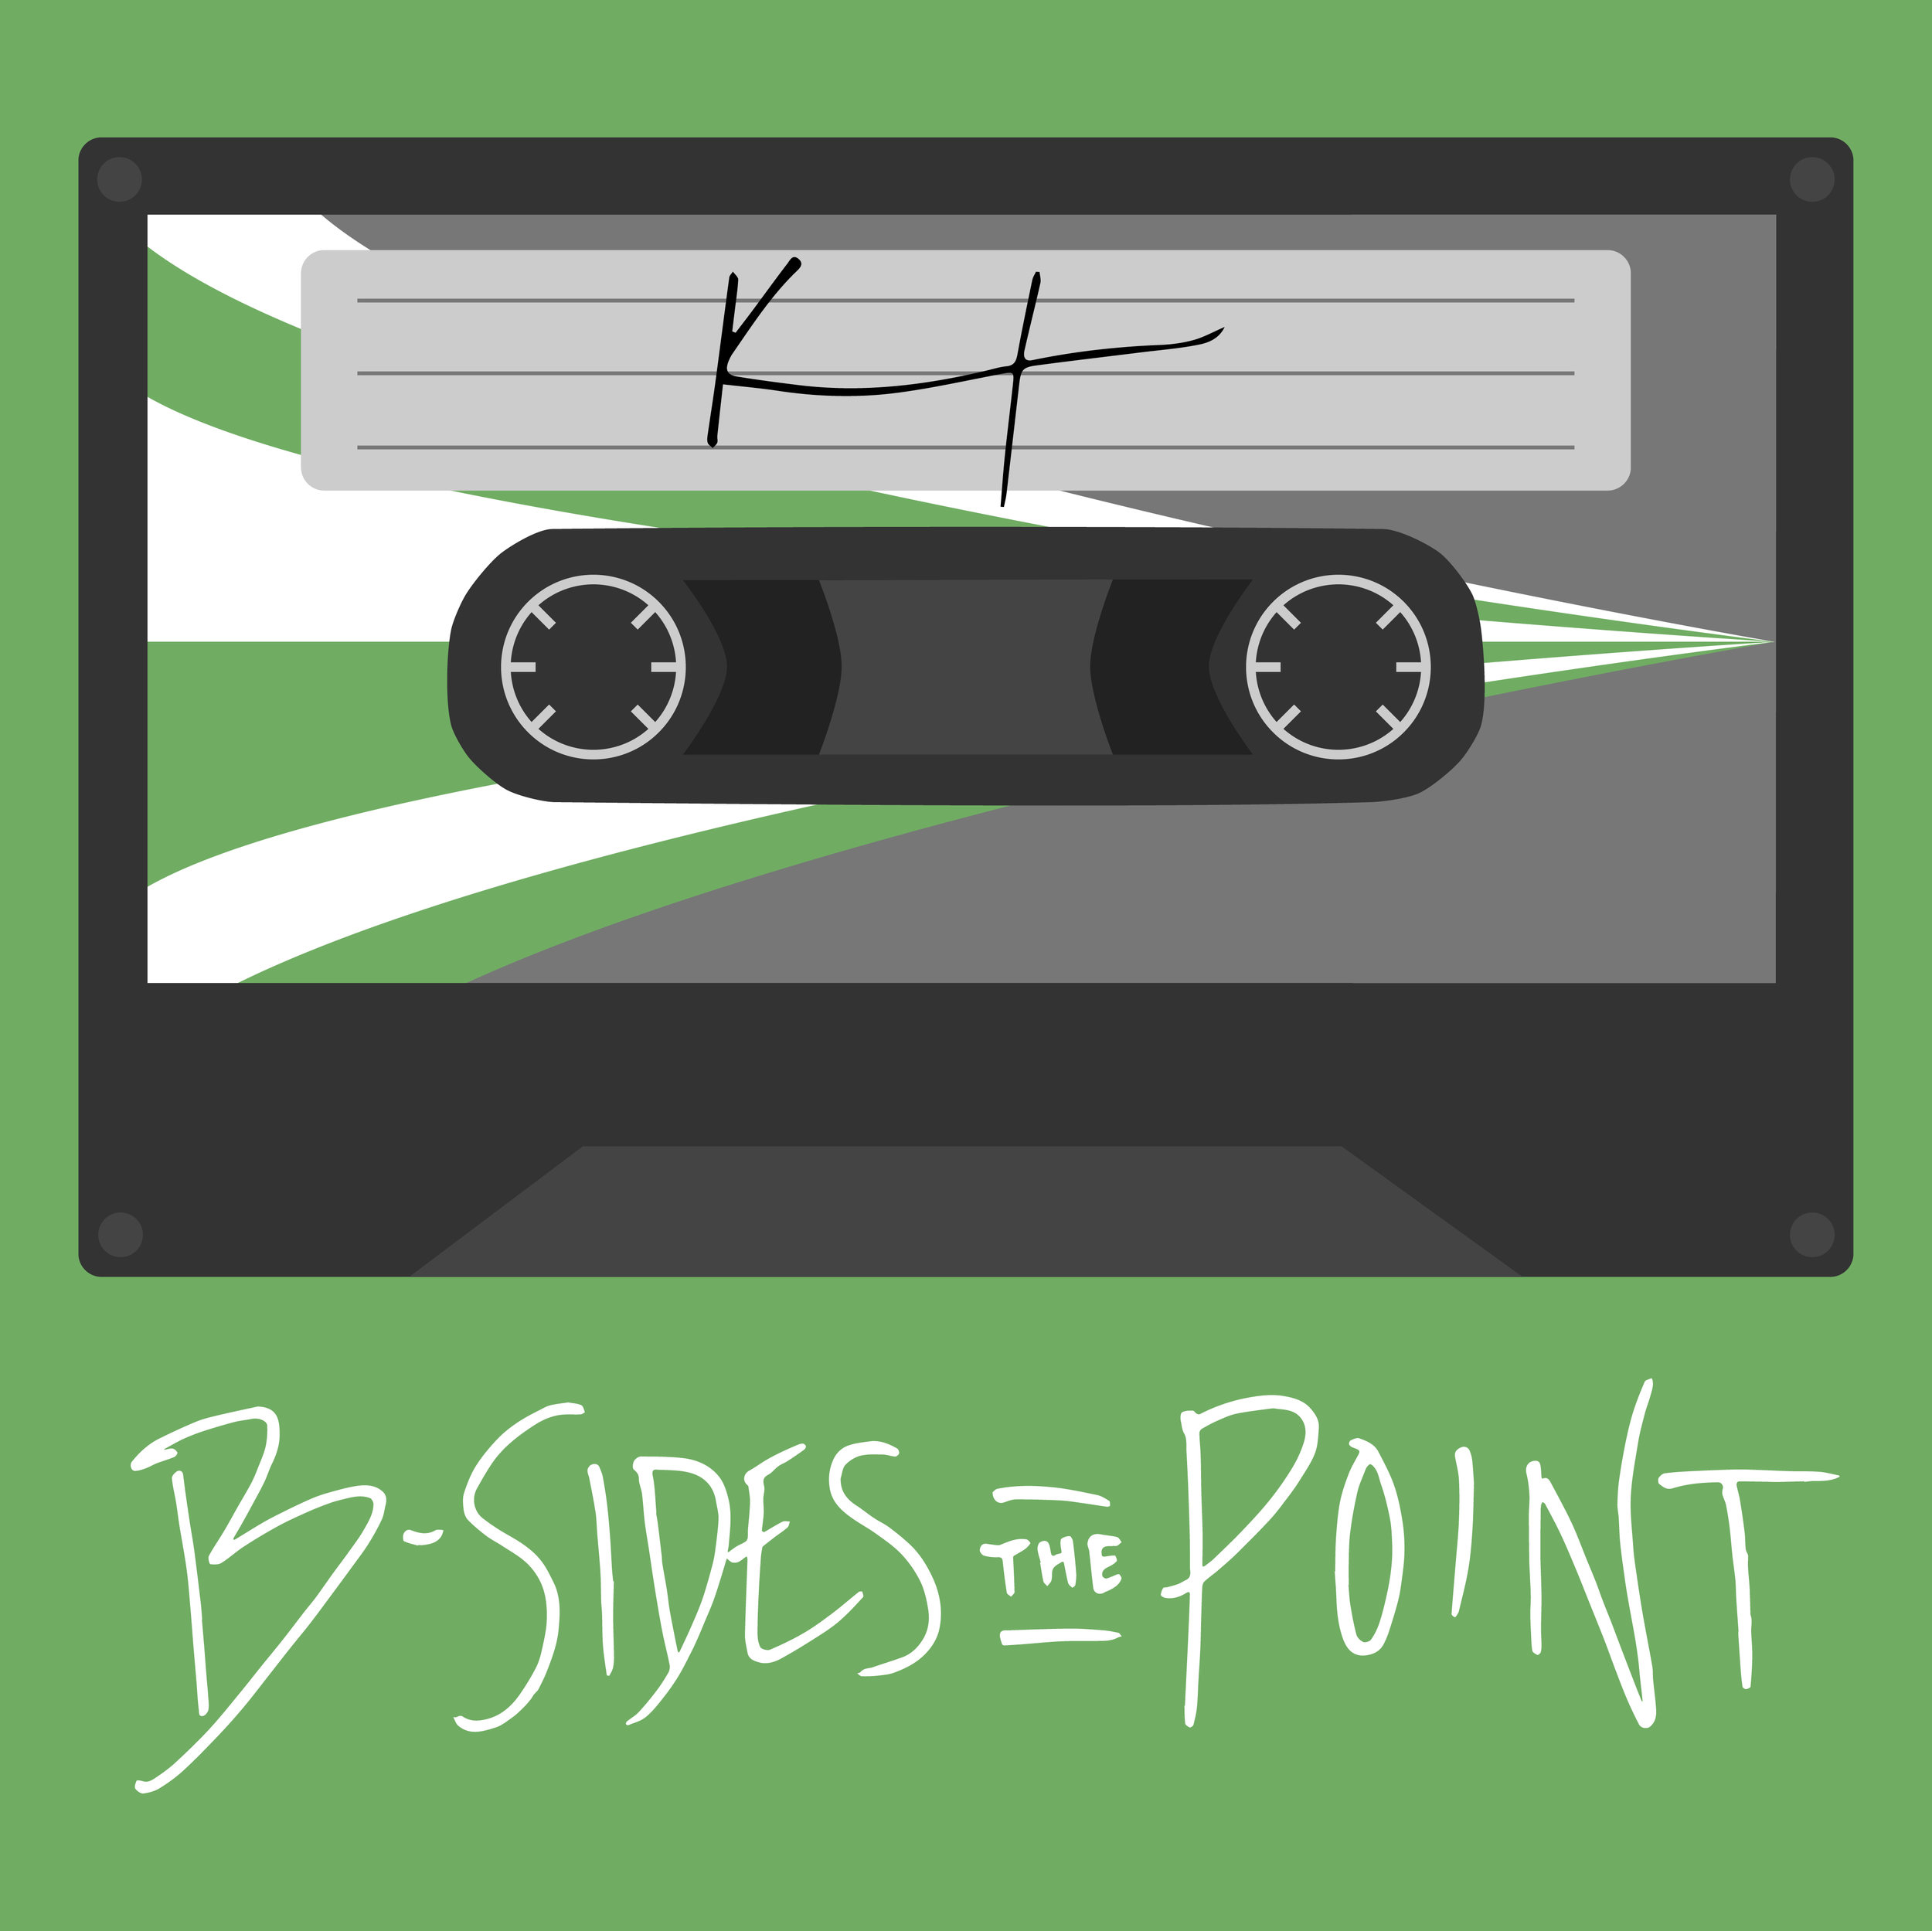 B-Sides The Point